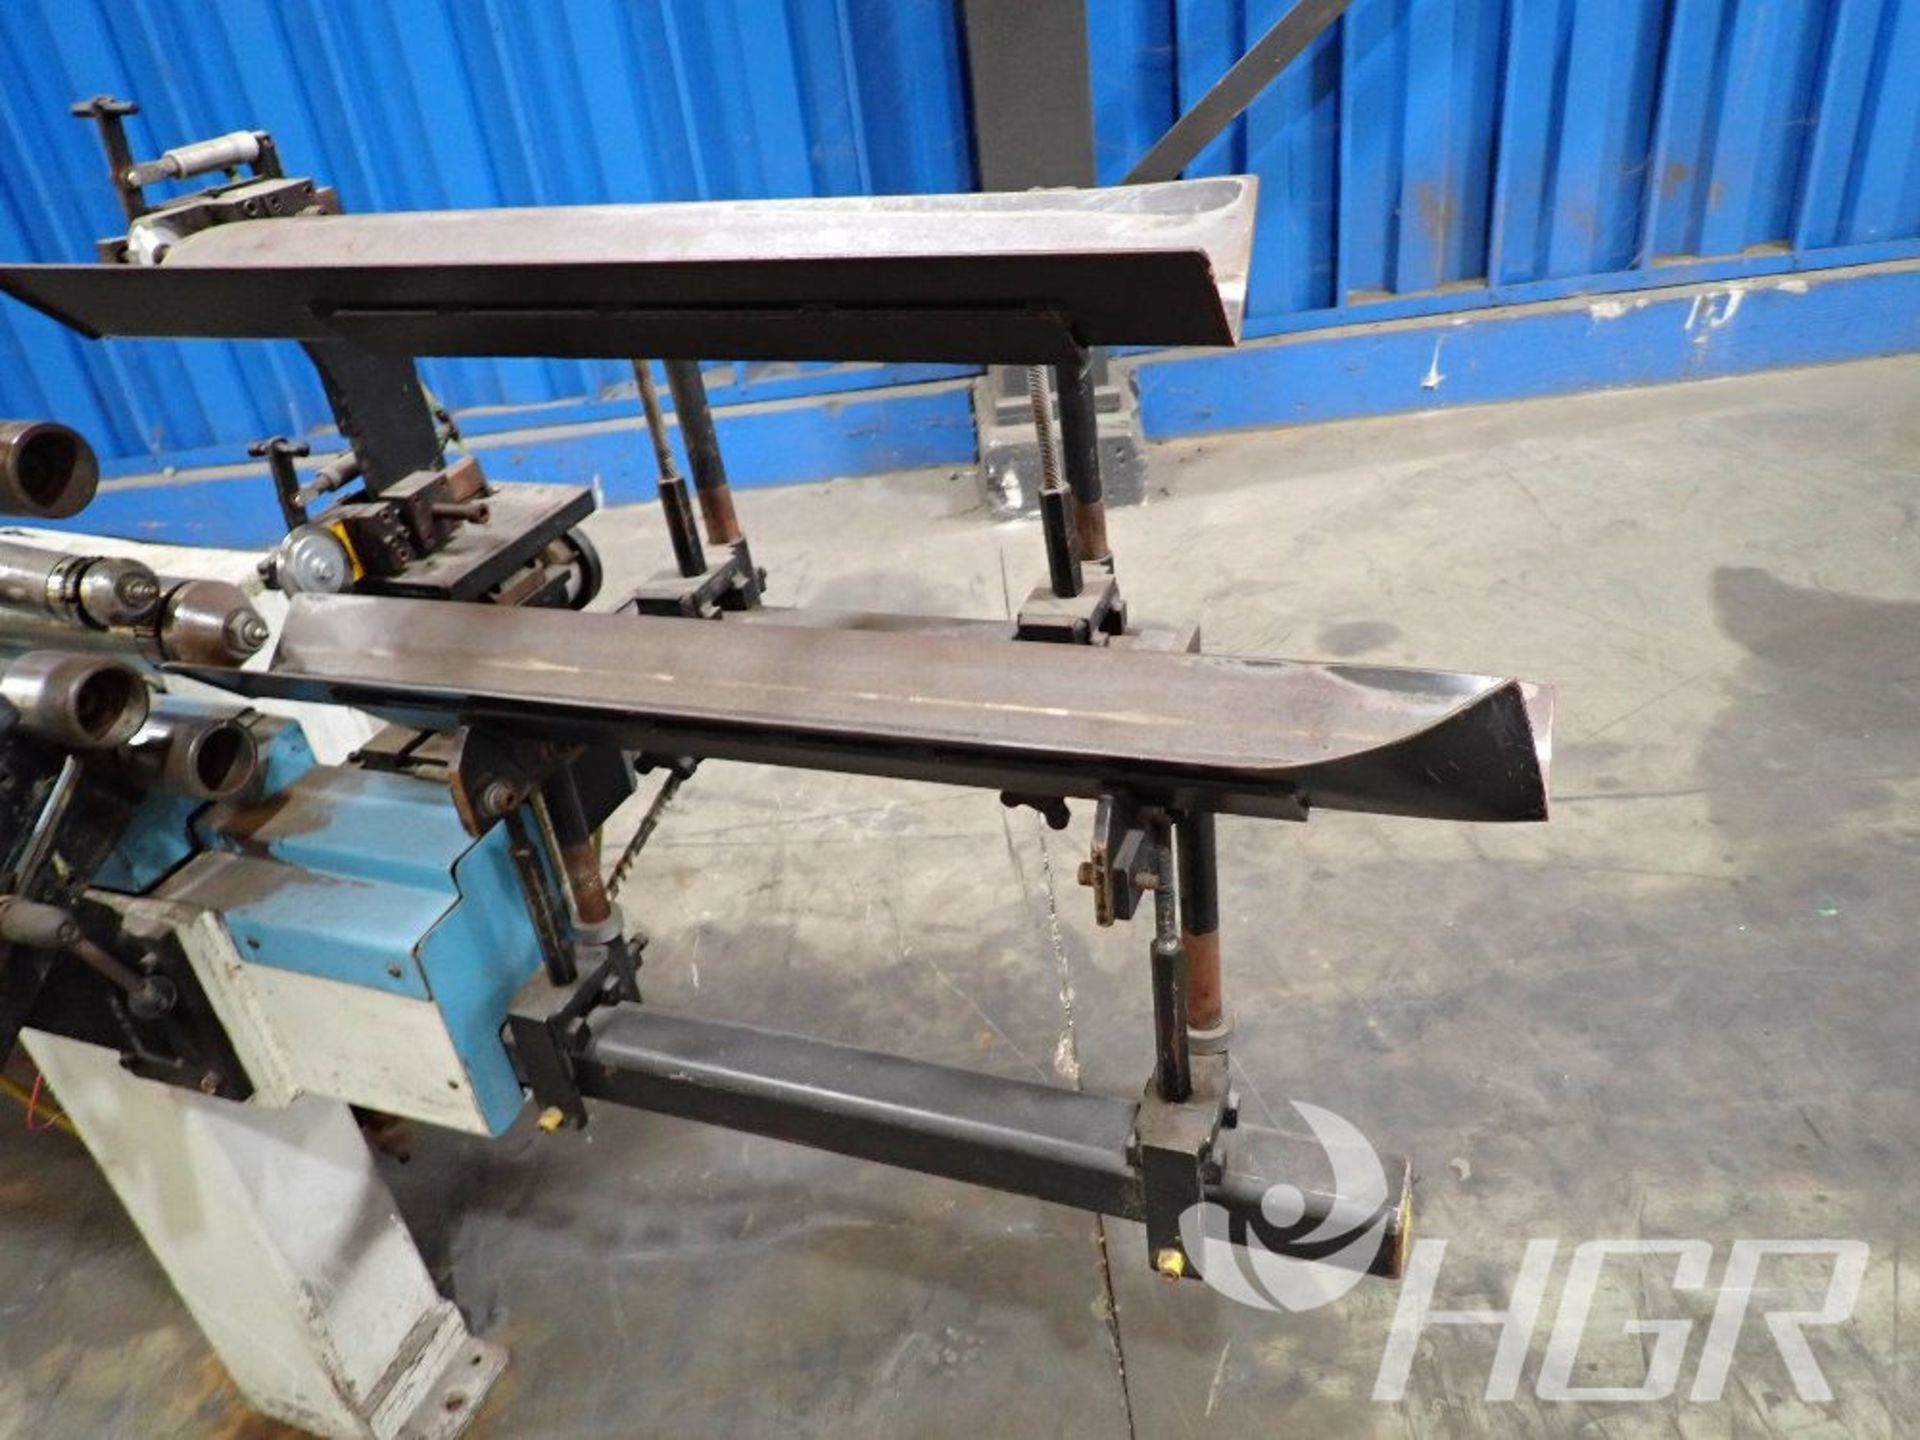 AUTOMATIC HANDLING CORE CUTTER, Model GREAT WHITE 7-1/2, Date: n/a; s/n 96080674, Approx. - Image 24 of 27